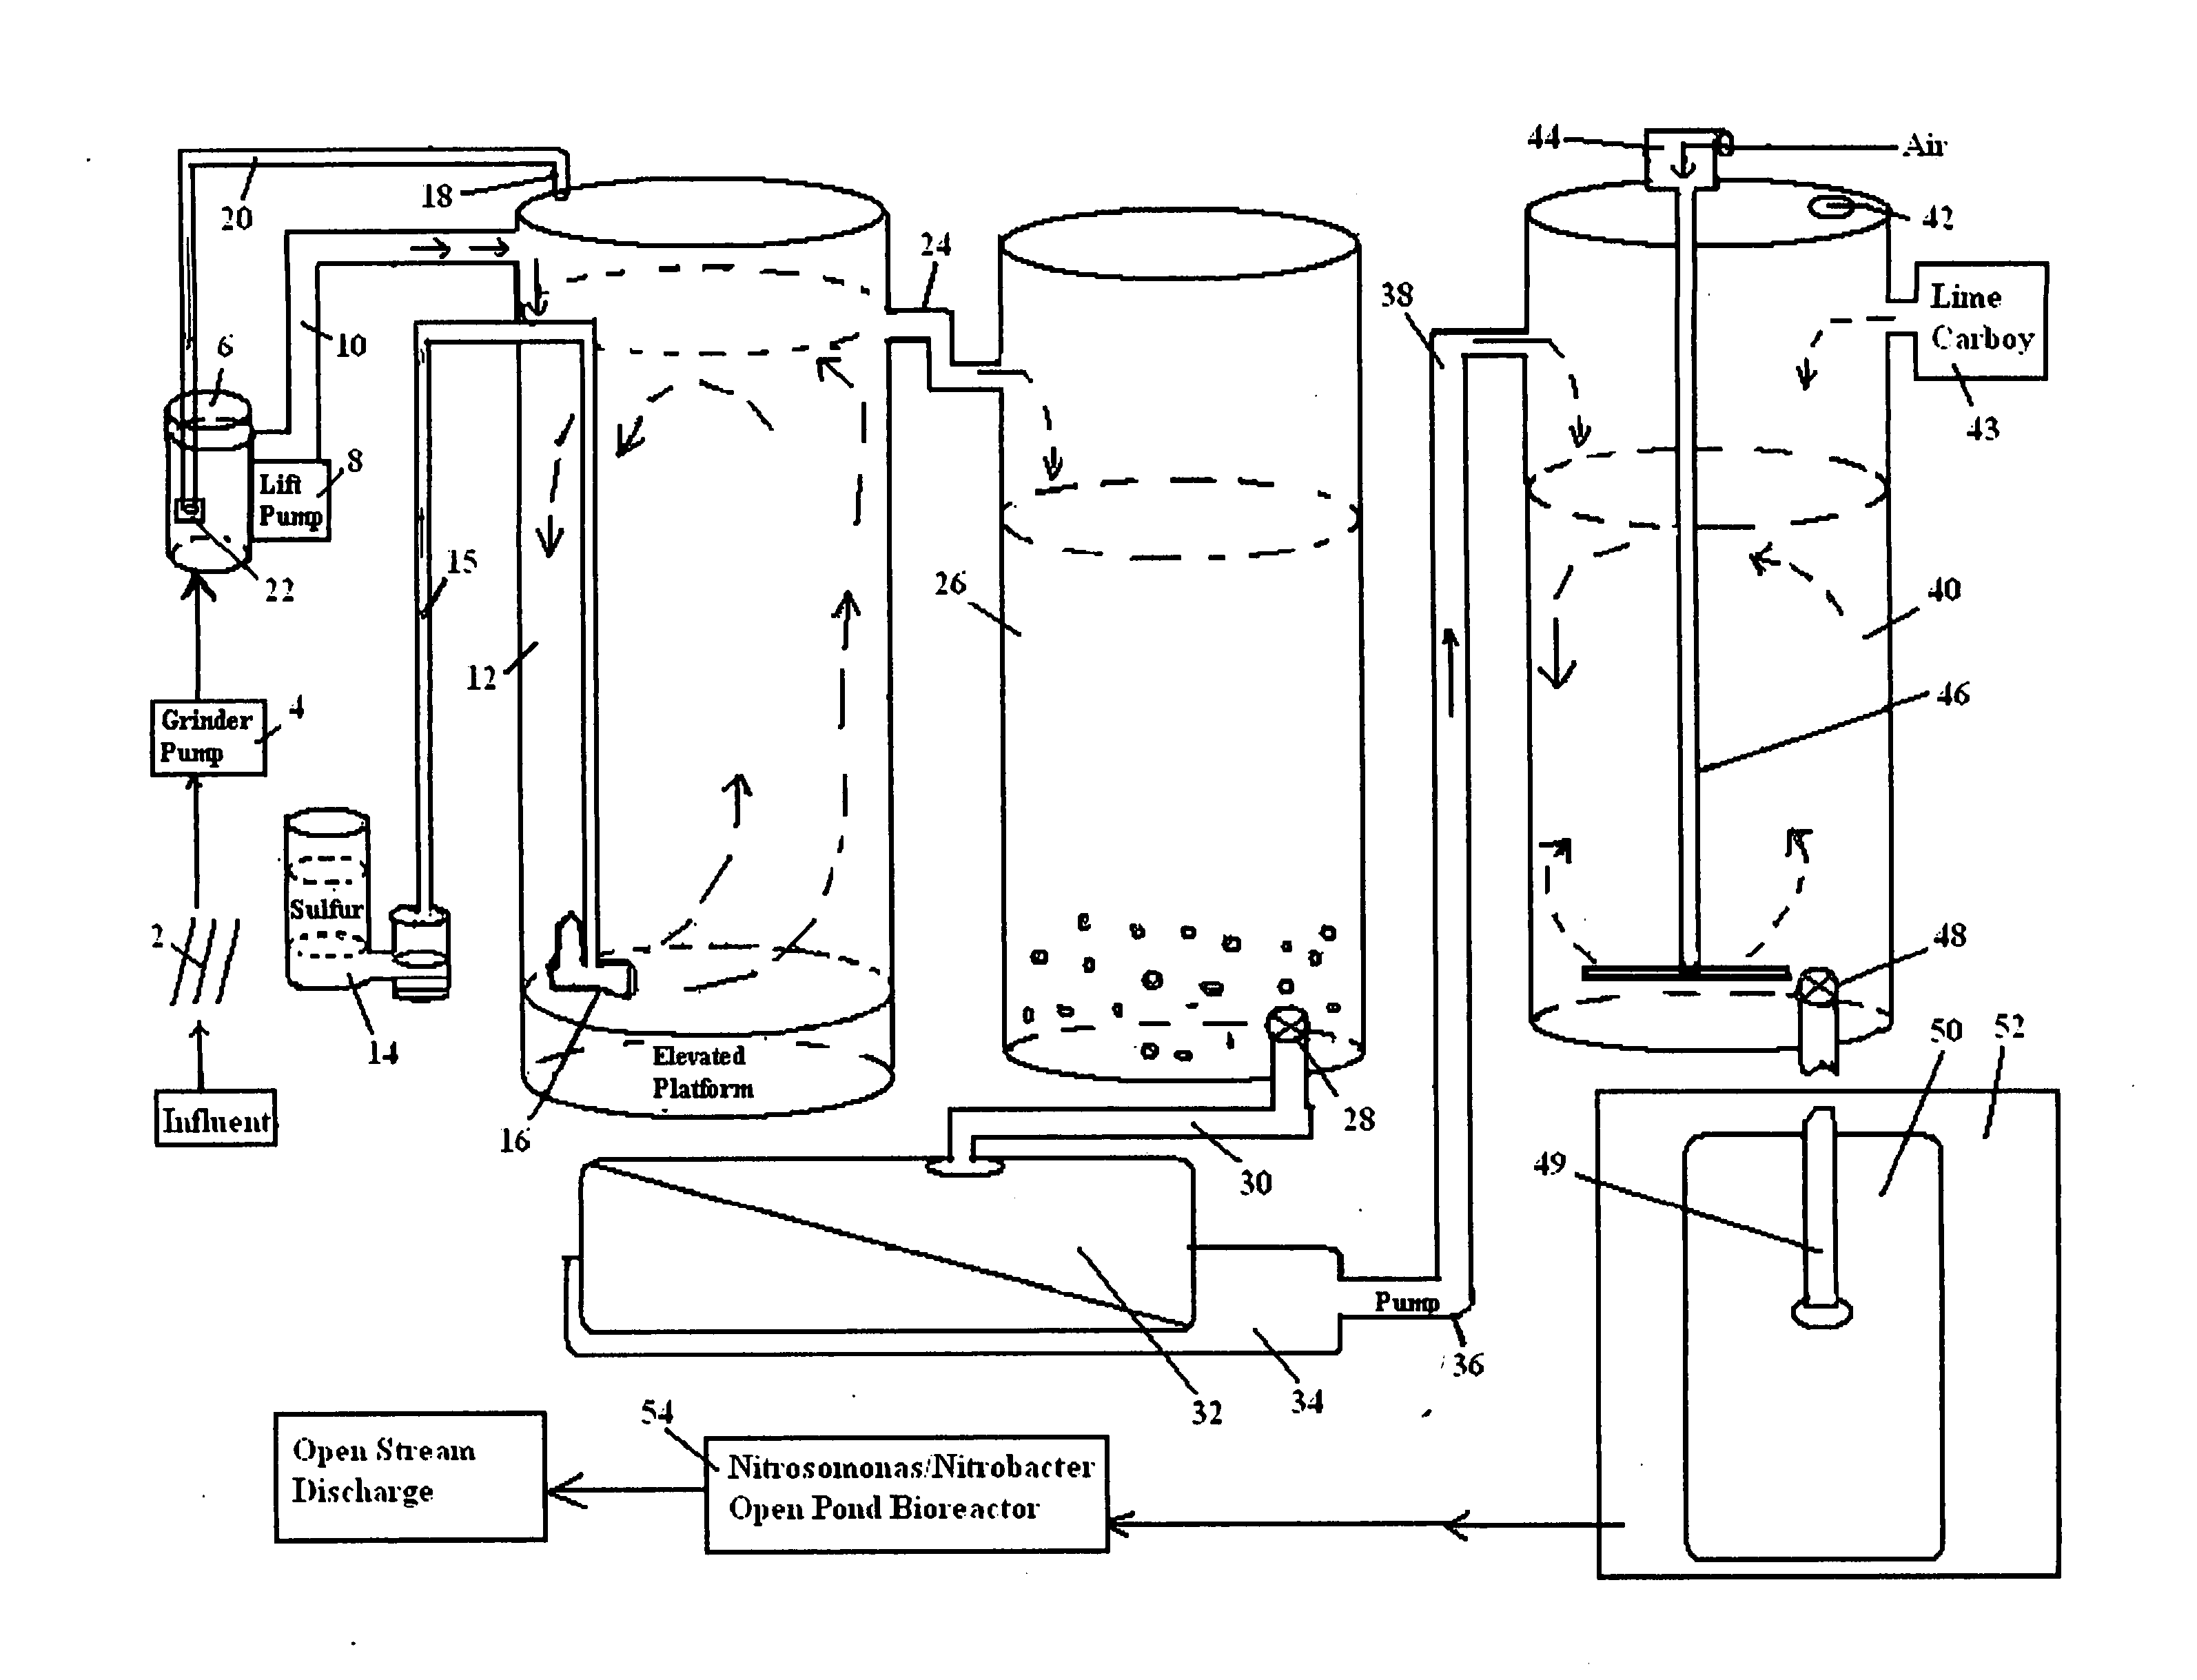 Wastewater chemical/biological treatment method for open water discharge